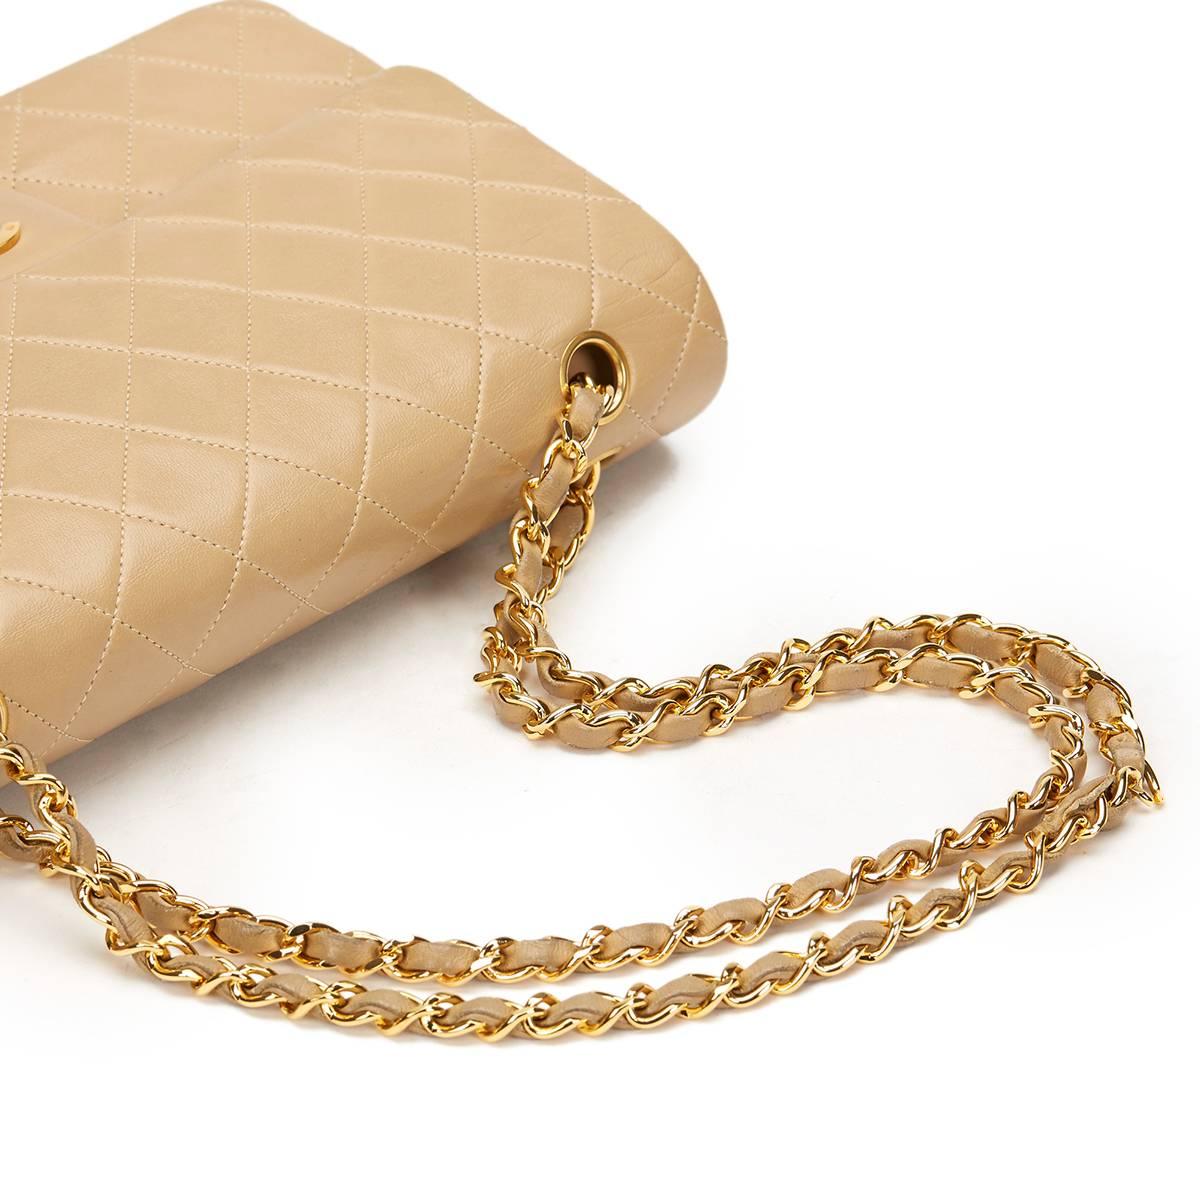 1990 Chanel Beige Quilted Lambskin Vintage Medium Classic Double Flap Bag 1